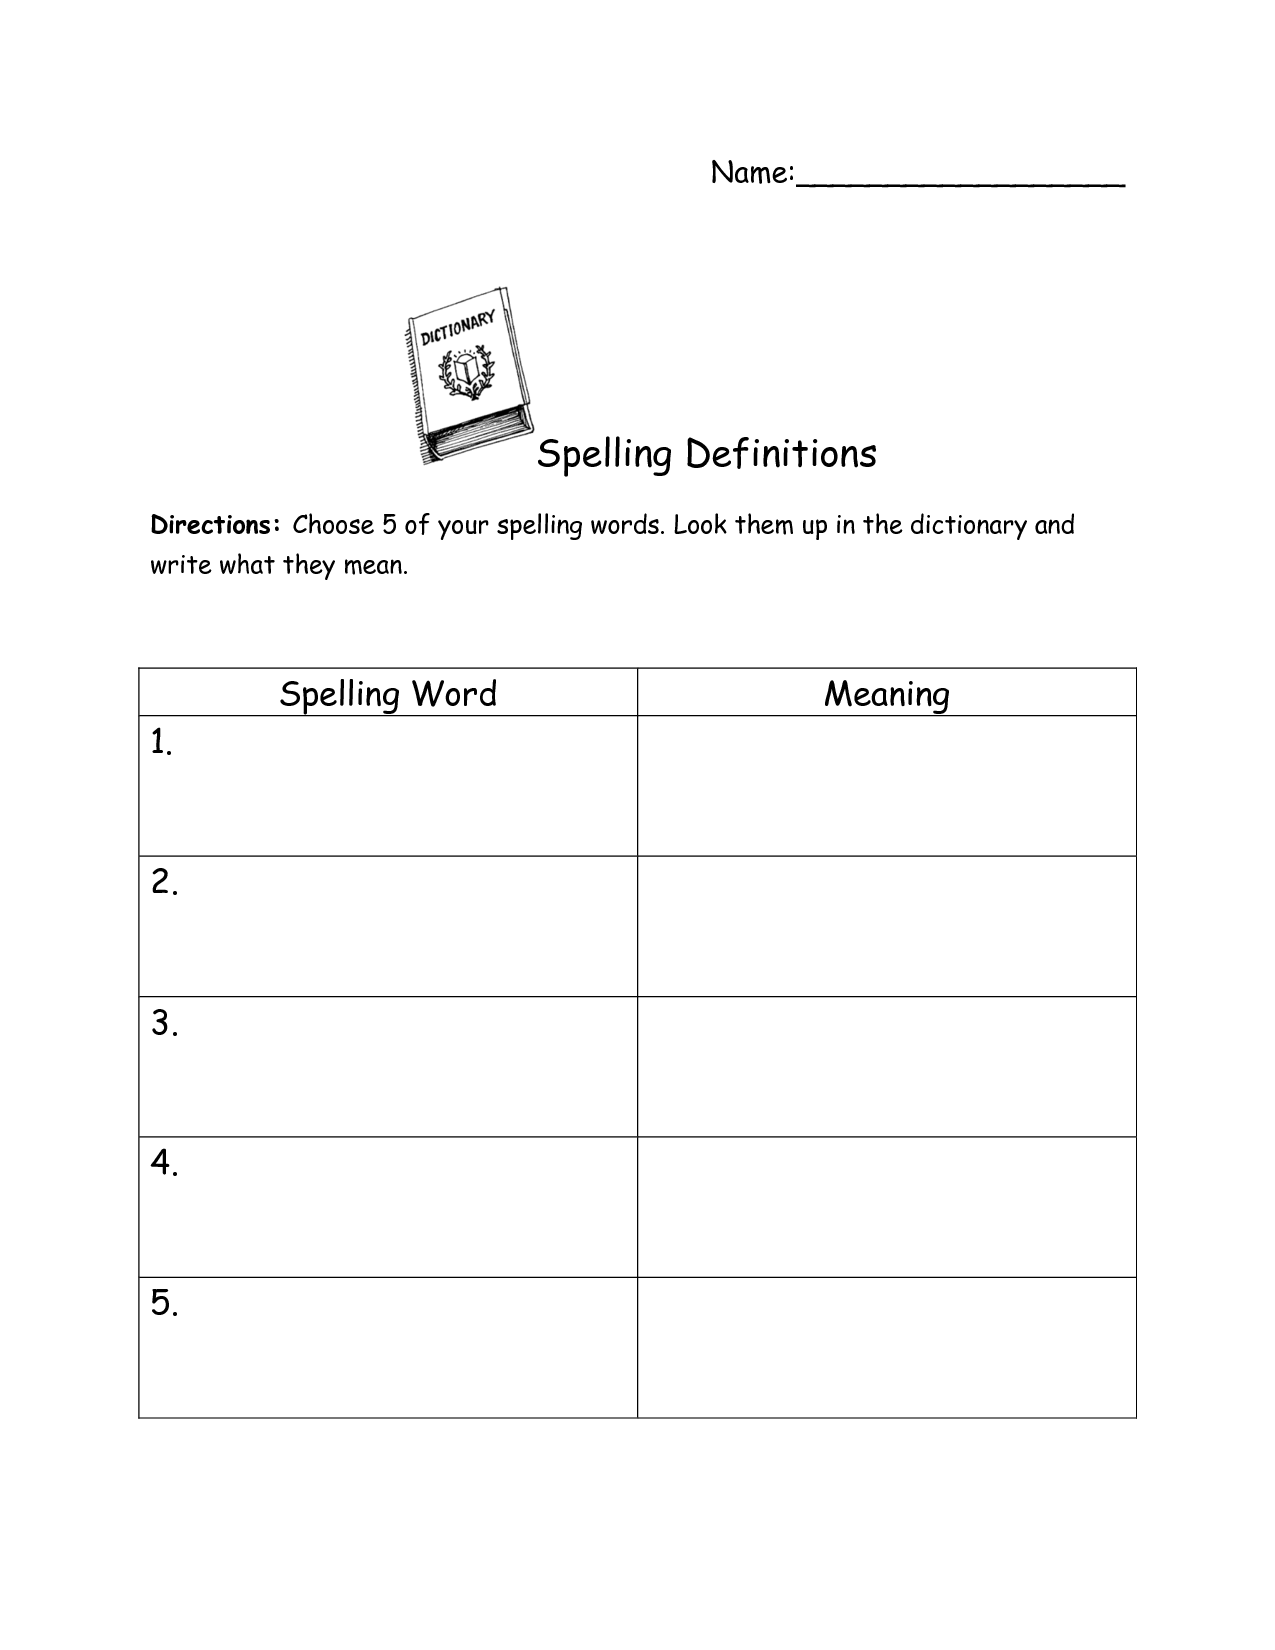 15-best-images-of-word-definition-worksheets-2nd-grade-vocabulary-words-and-definitions